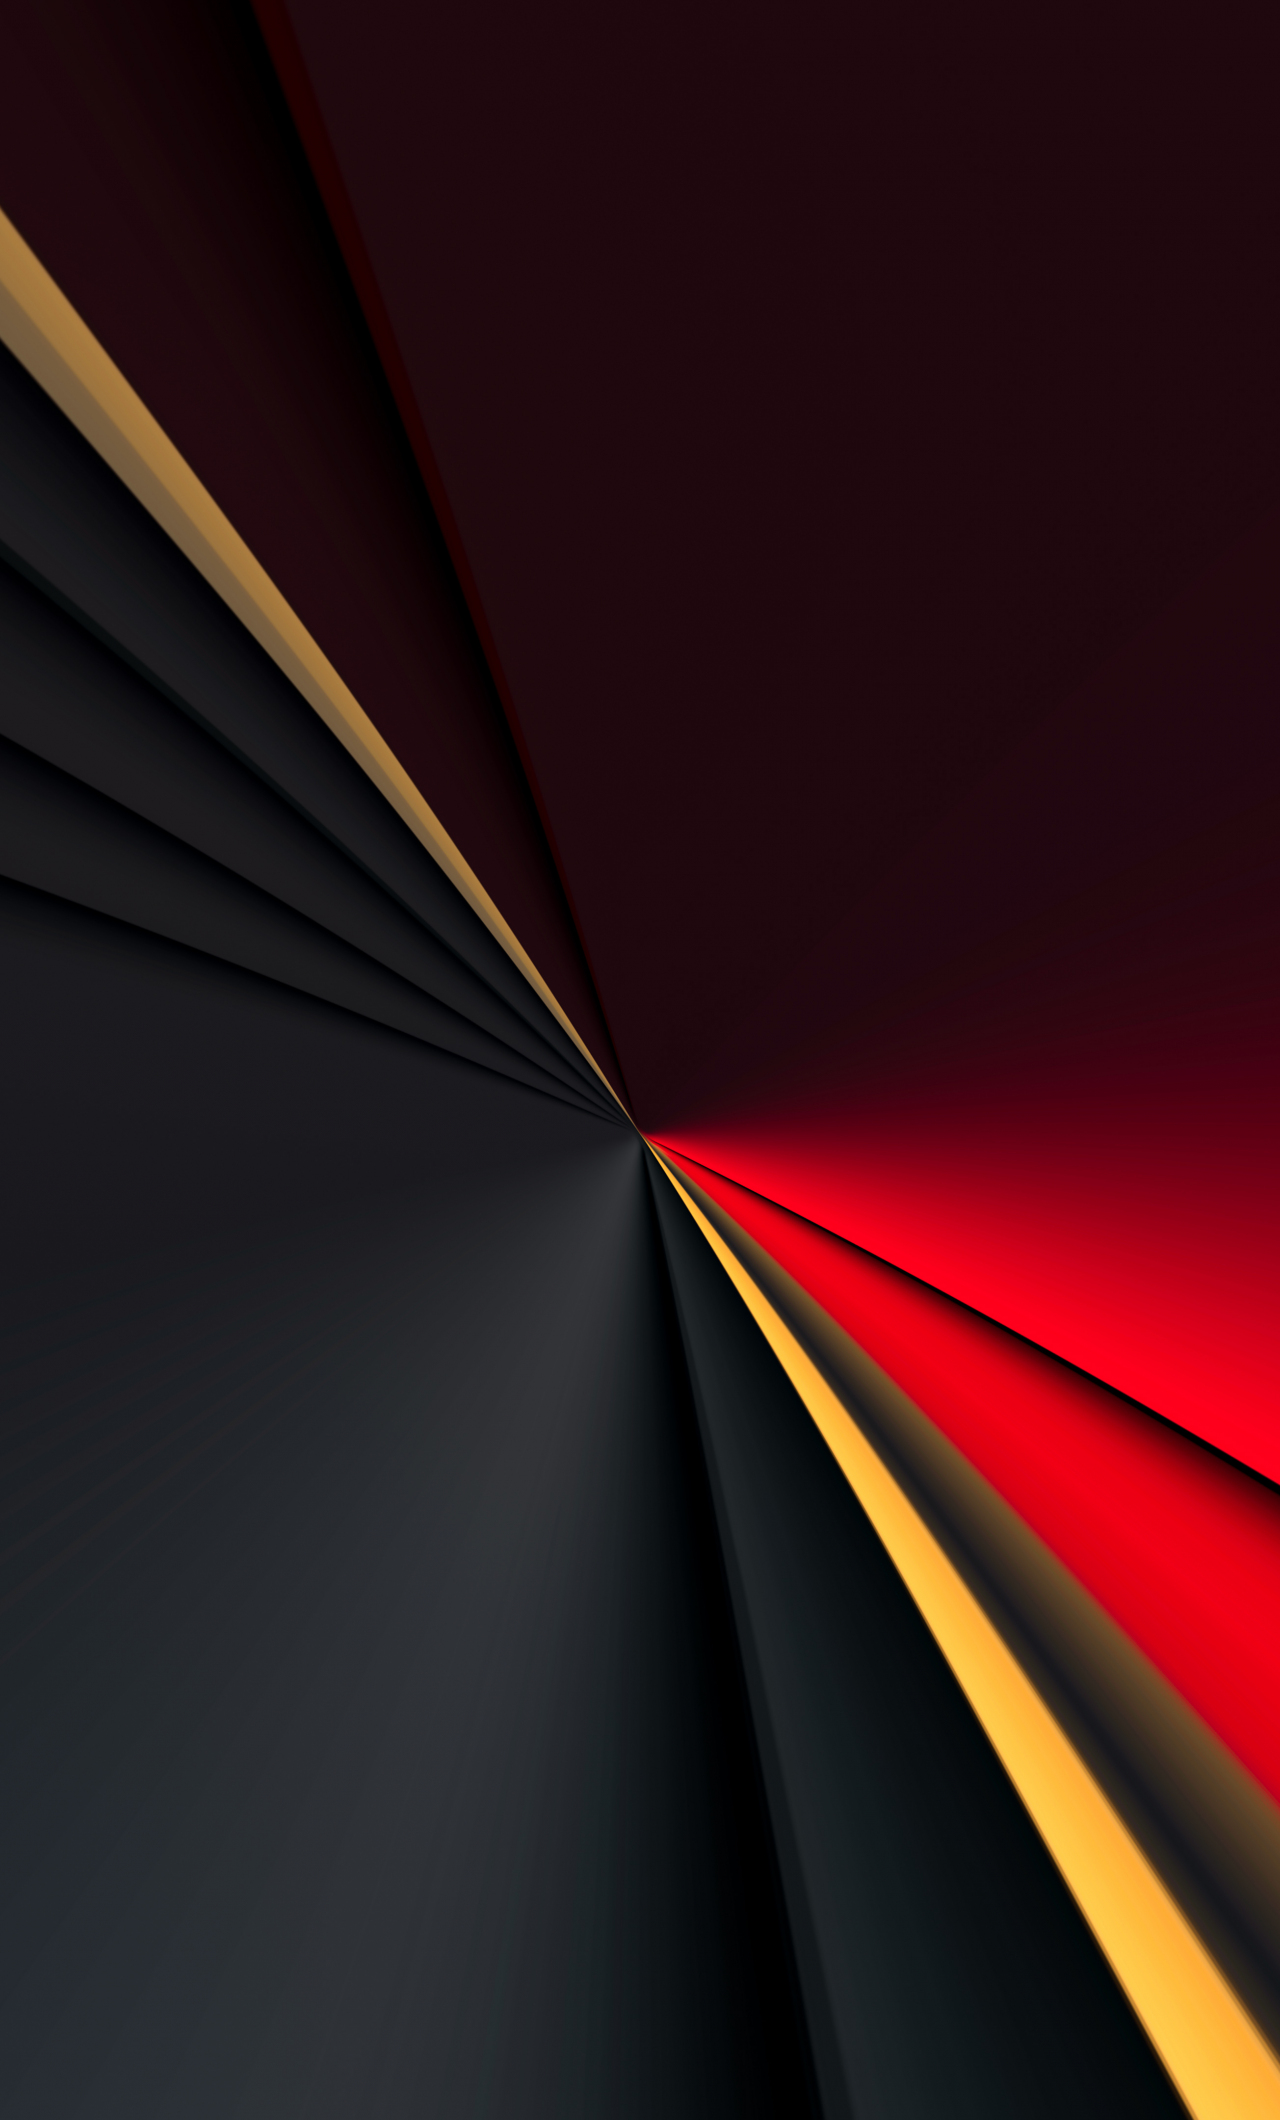 Download wallpaper 1280x2120 abstract, dark and multi-colored stripes ...